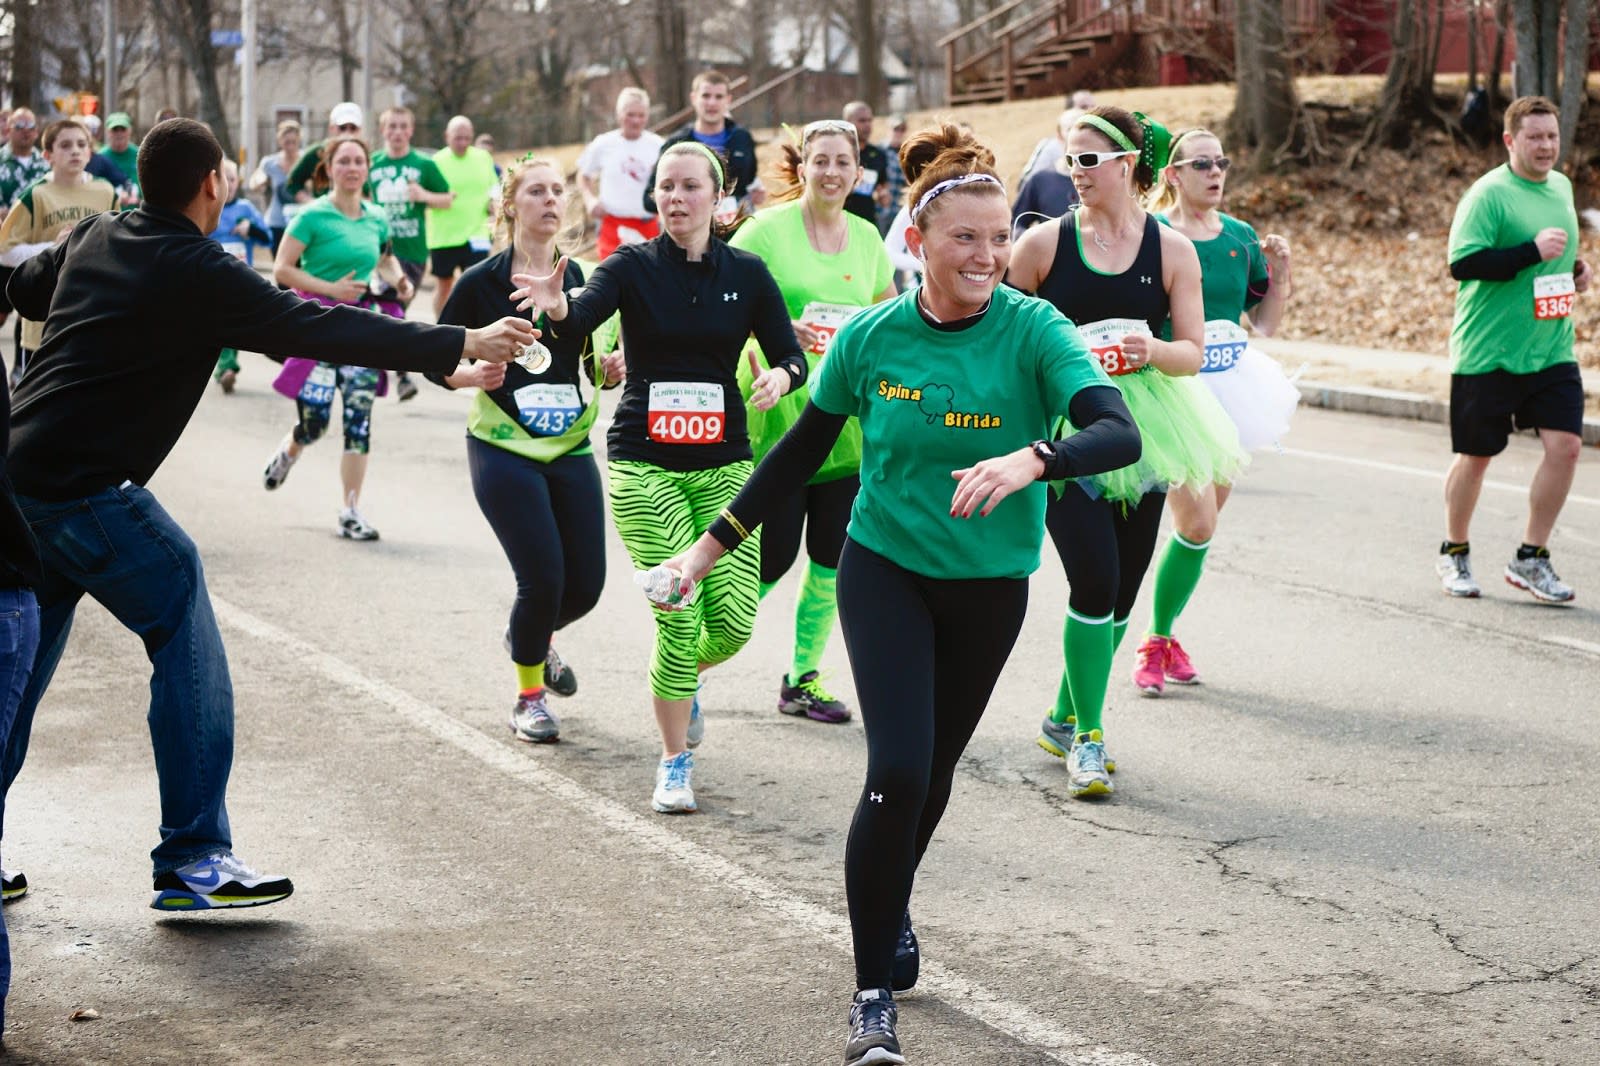 Holyoke St. Patrick's Road Race Running in Holyoke — Let’s Do This